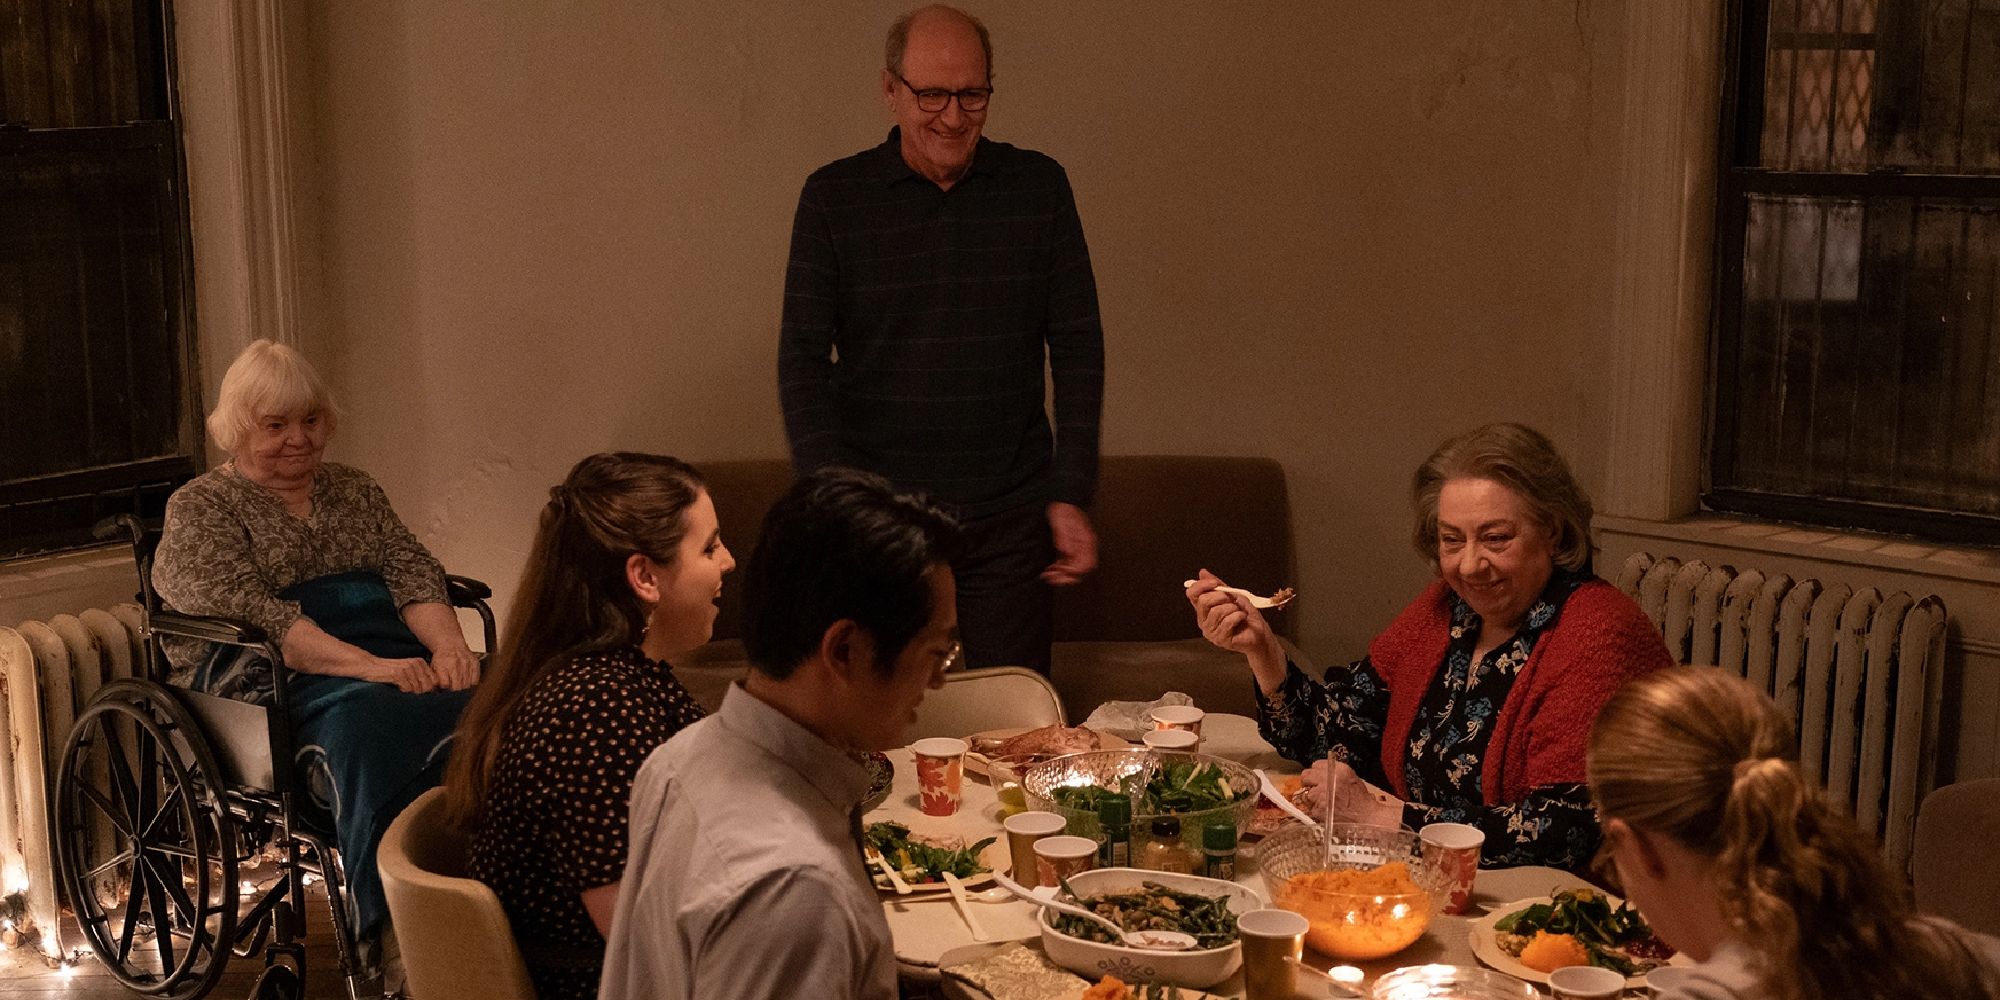 Erin Blake standing at the head of the table while his family looks at him in The Humans.